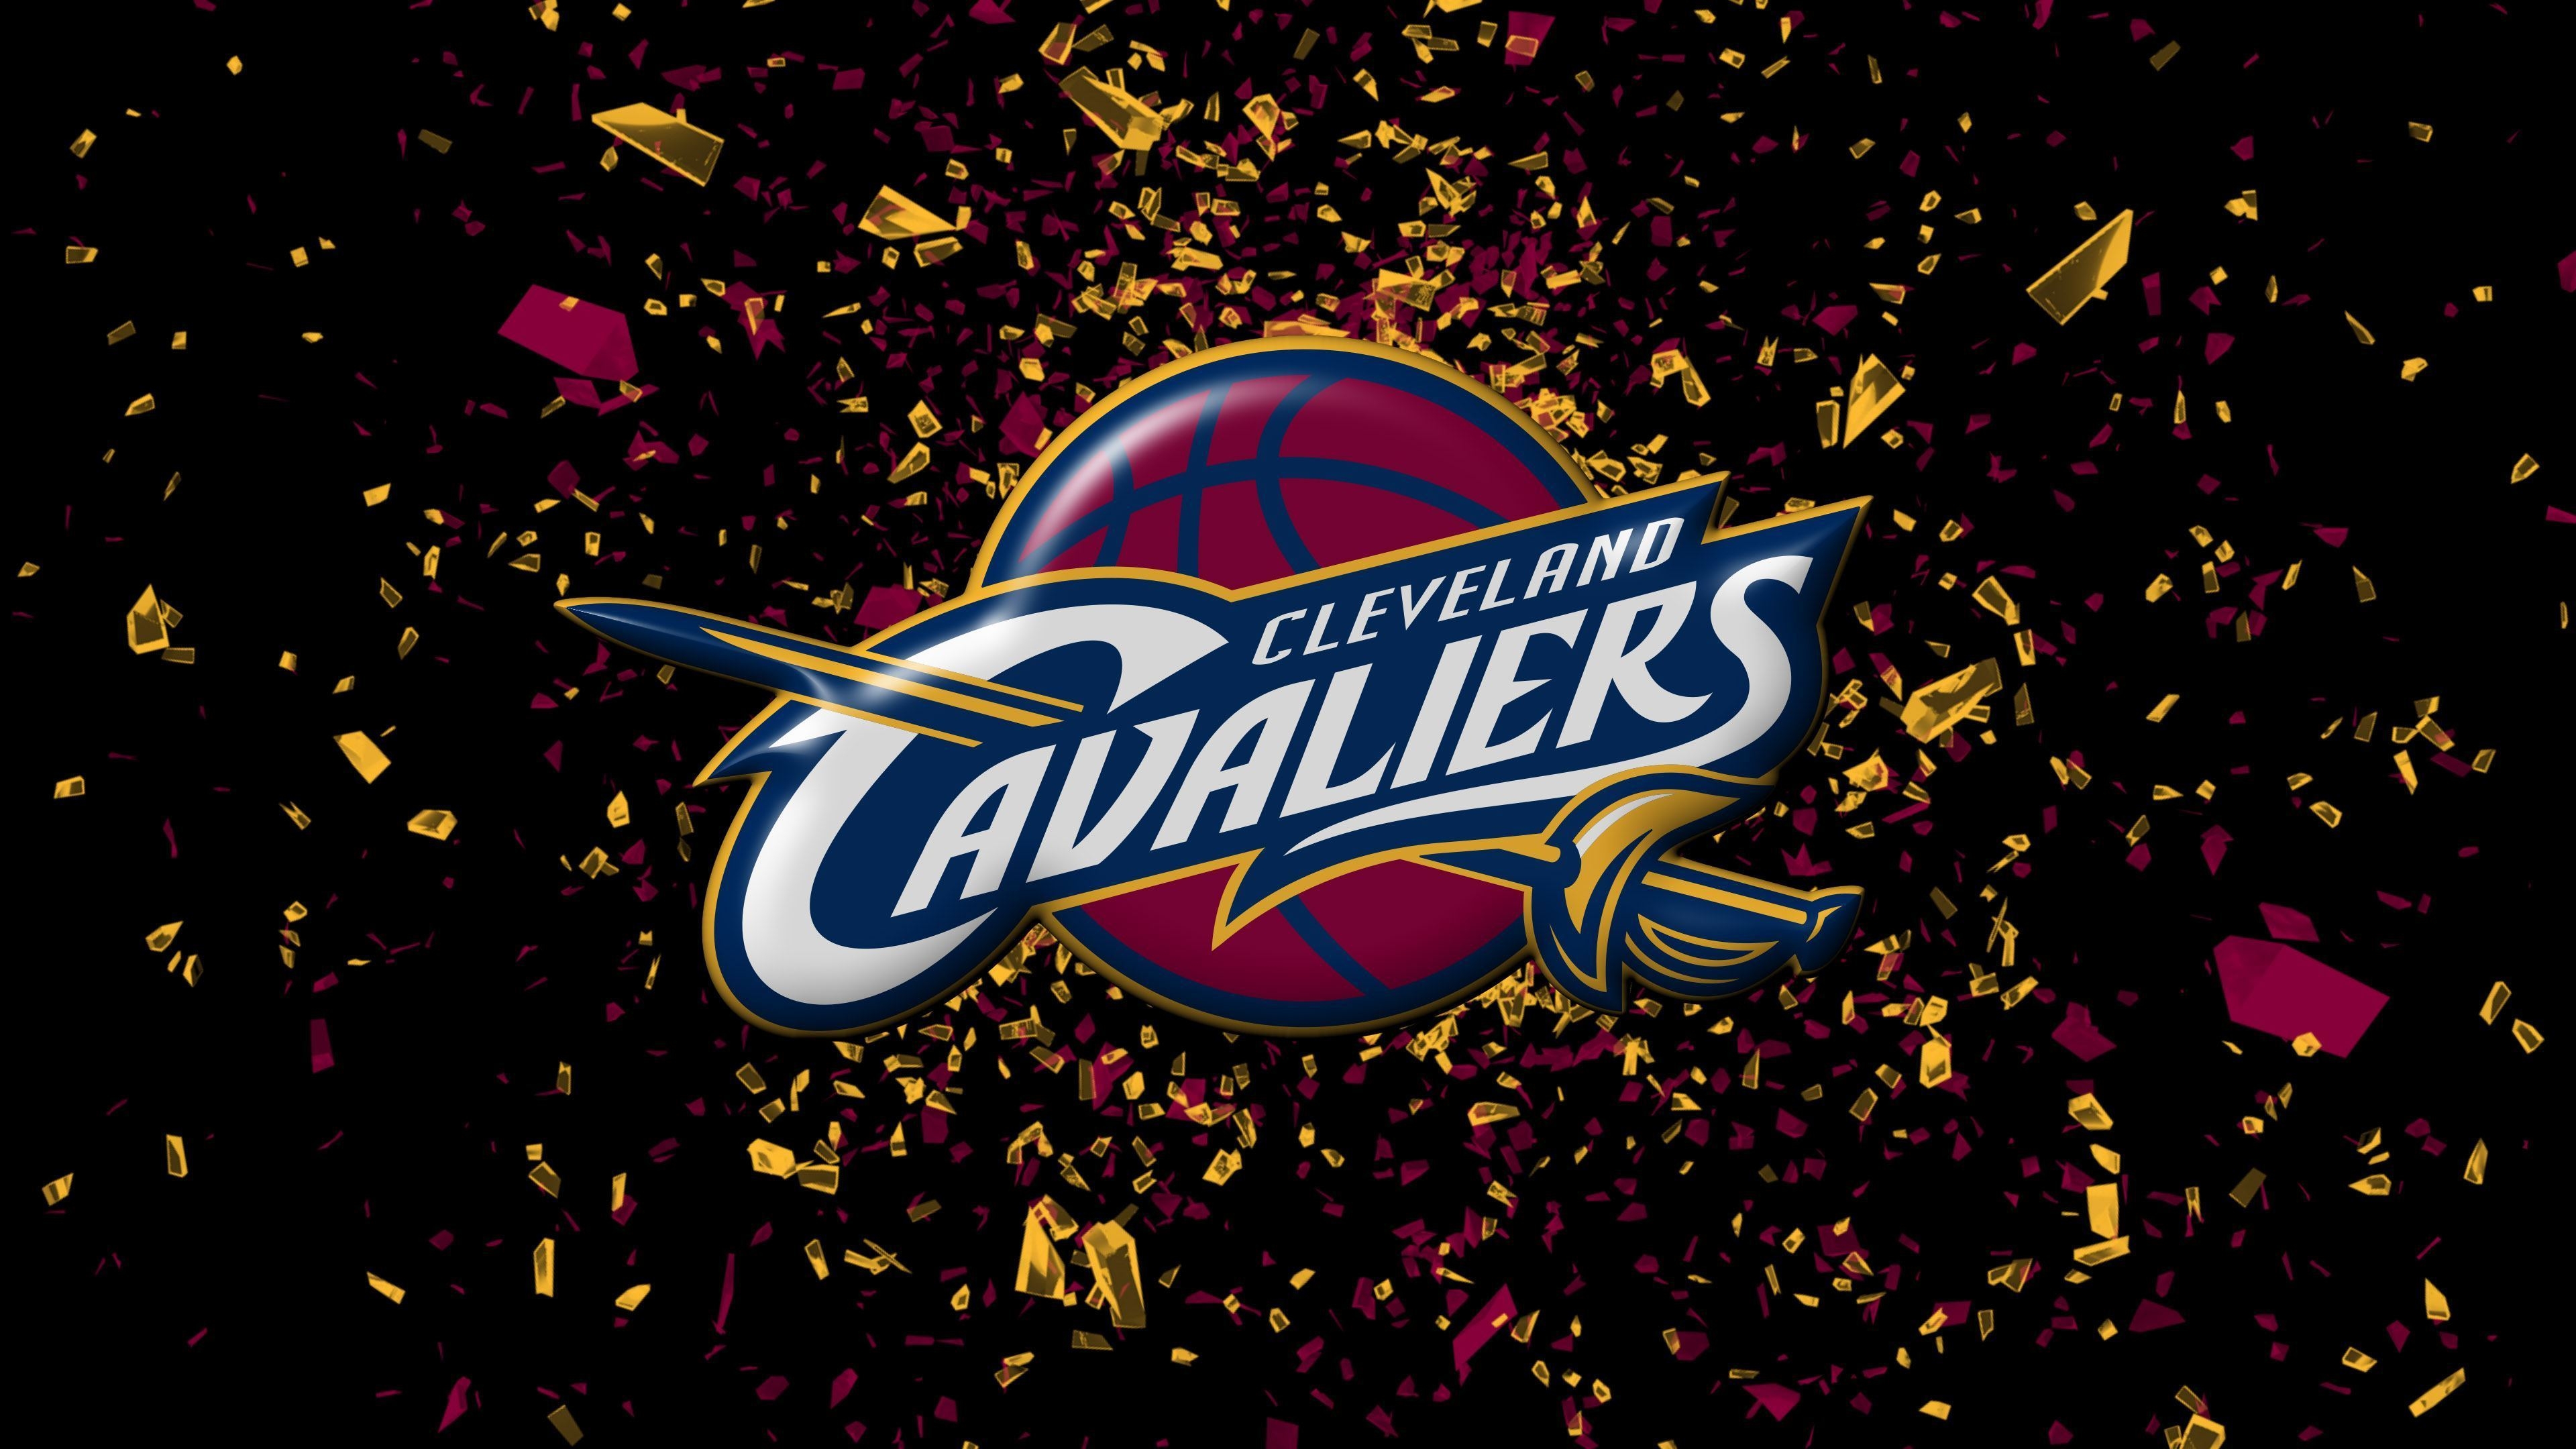 Cleveland Cavaliers for 3840 x 2160 Ultra HD resolution